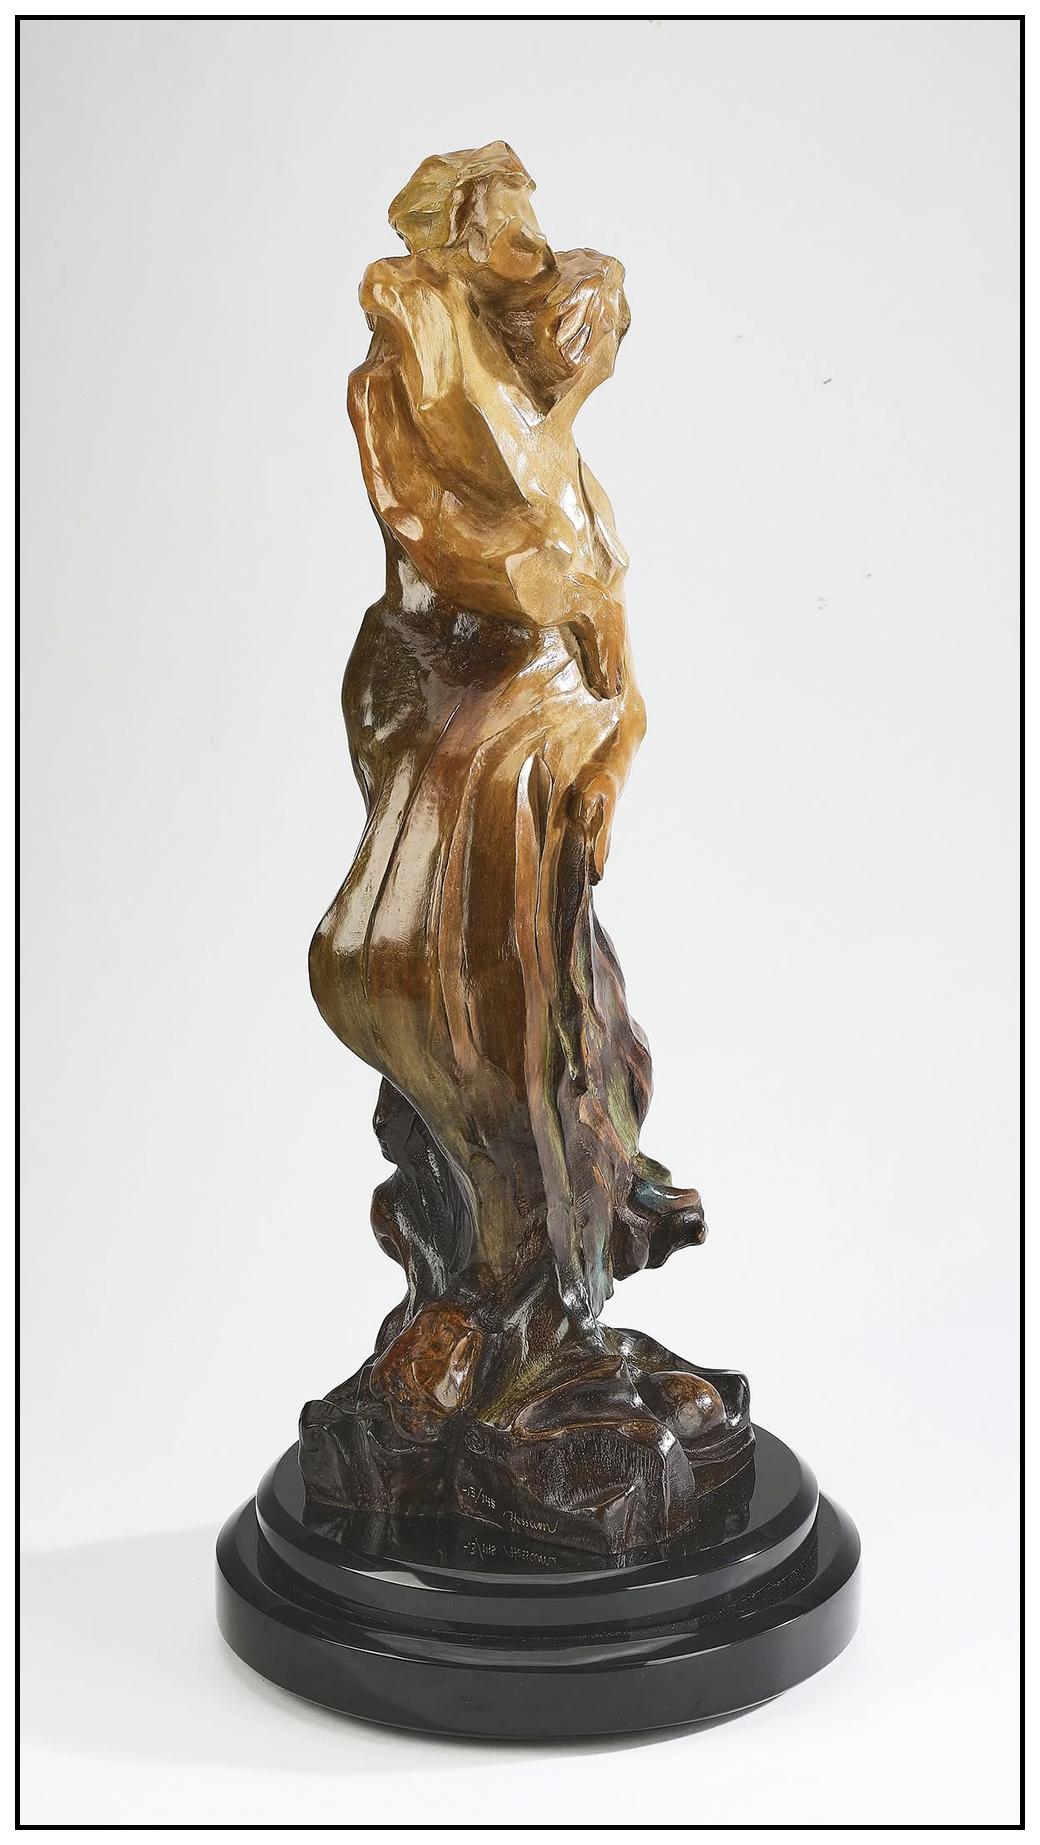 Hessam Abrishami Original & Authentic Full Round Bronze Sculpture "Inseparable", on a Custom Rotating Base, Listed with the Submit Best Offer option 

Accepting OFFERS Now: Up for sale is this very RARE (only 145 pieces in the edition), spectacular,